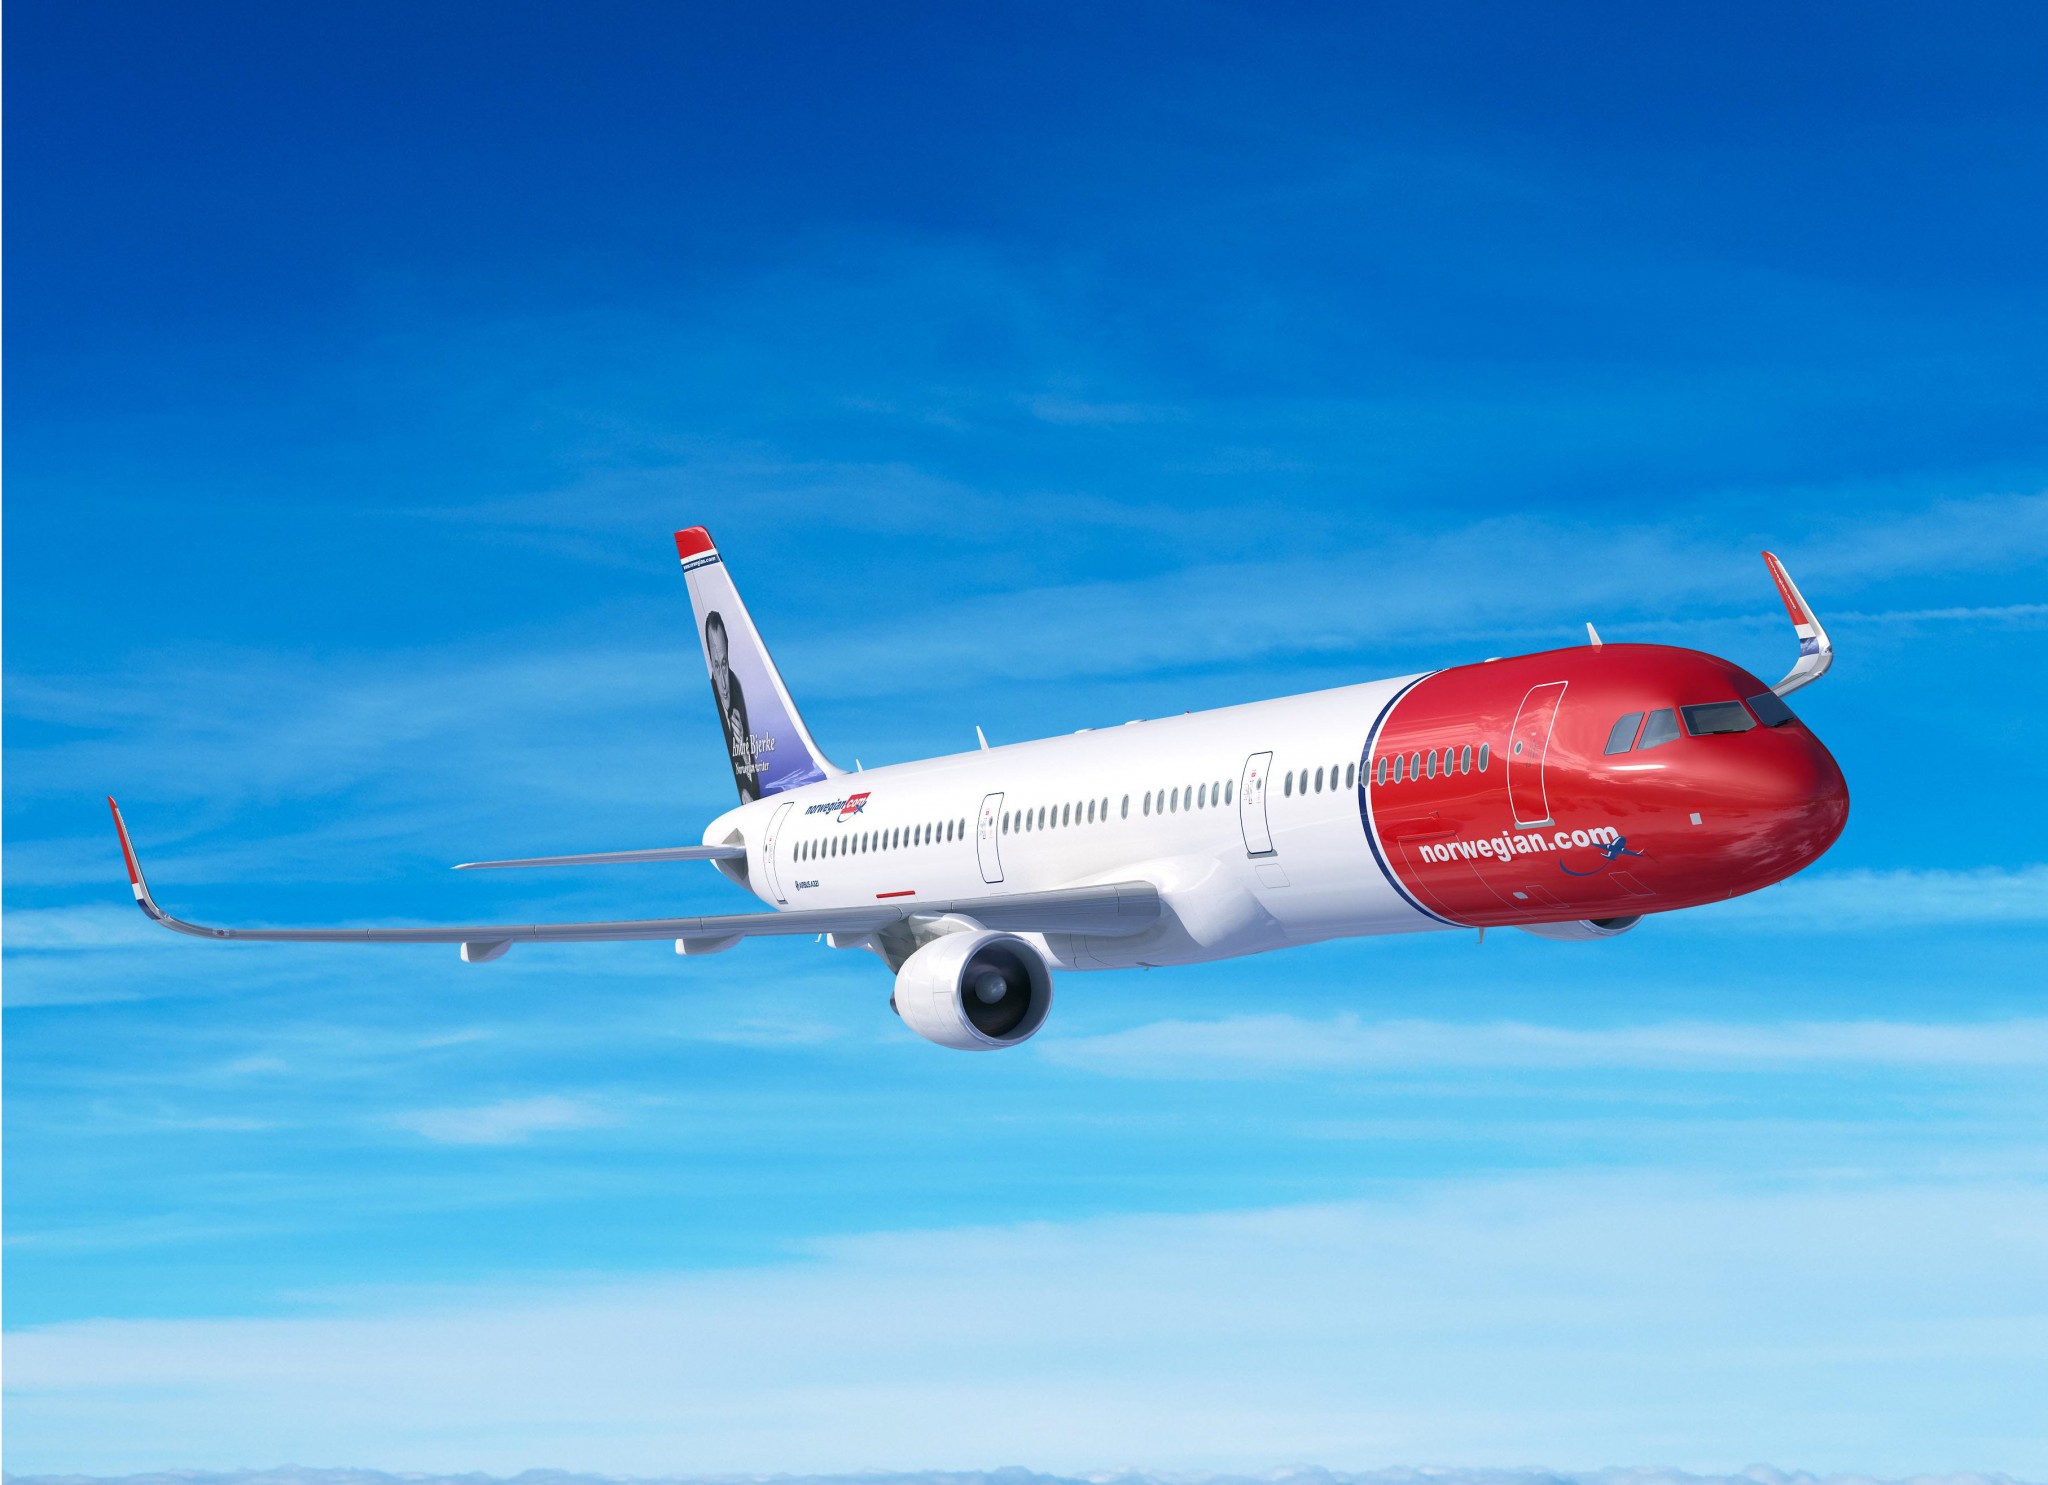 Norwegian reports record high year-end traffic figures